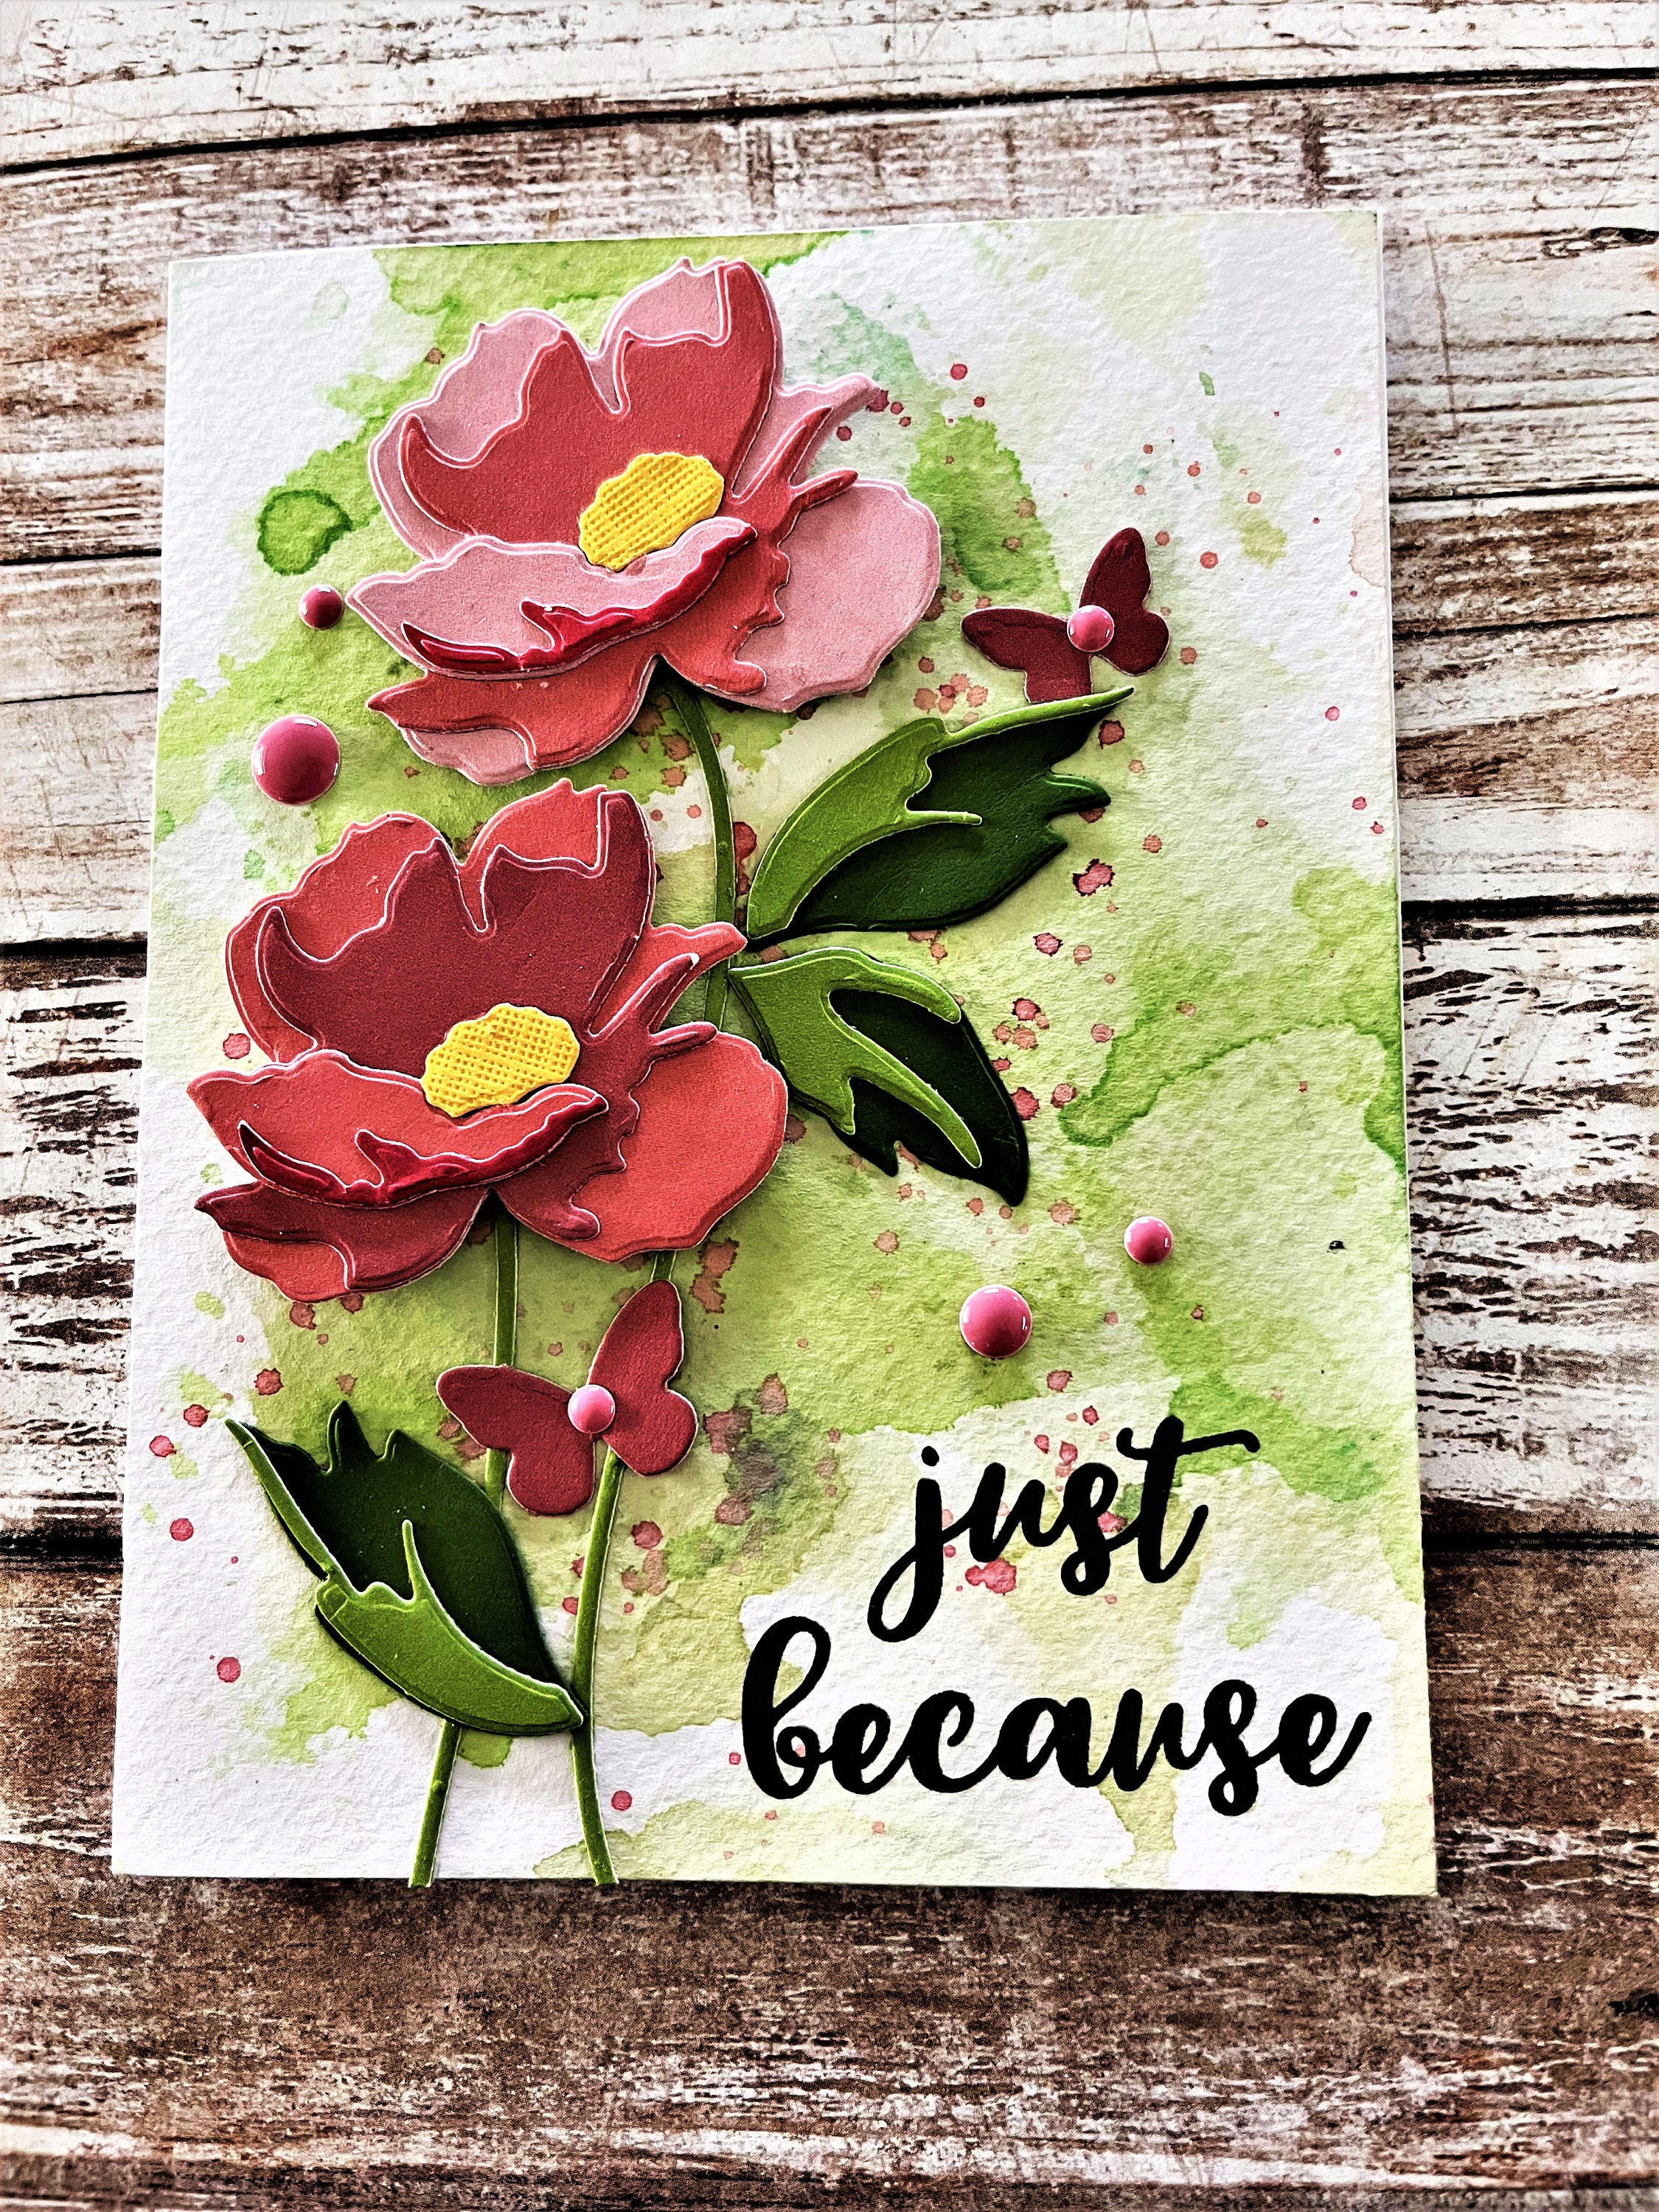 Just Poppies - Etsy